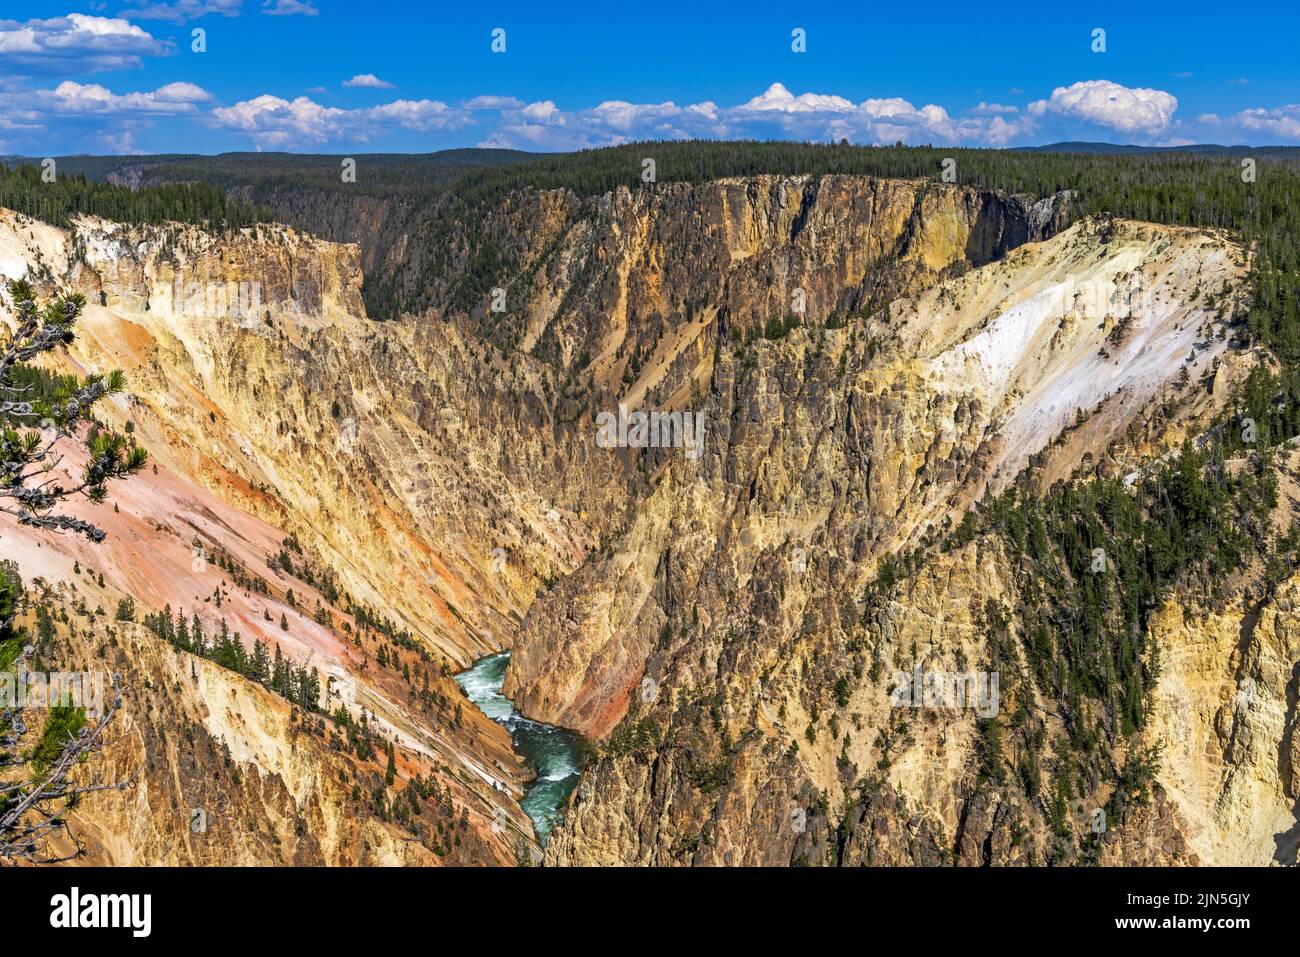 Grand Canyon of the Yellowstone with the Yellowstone River visible at the bottom in Yellowstone National Park, Park County, Wyoming, USA. Stock Photo